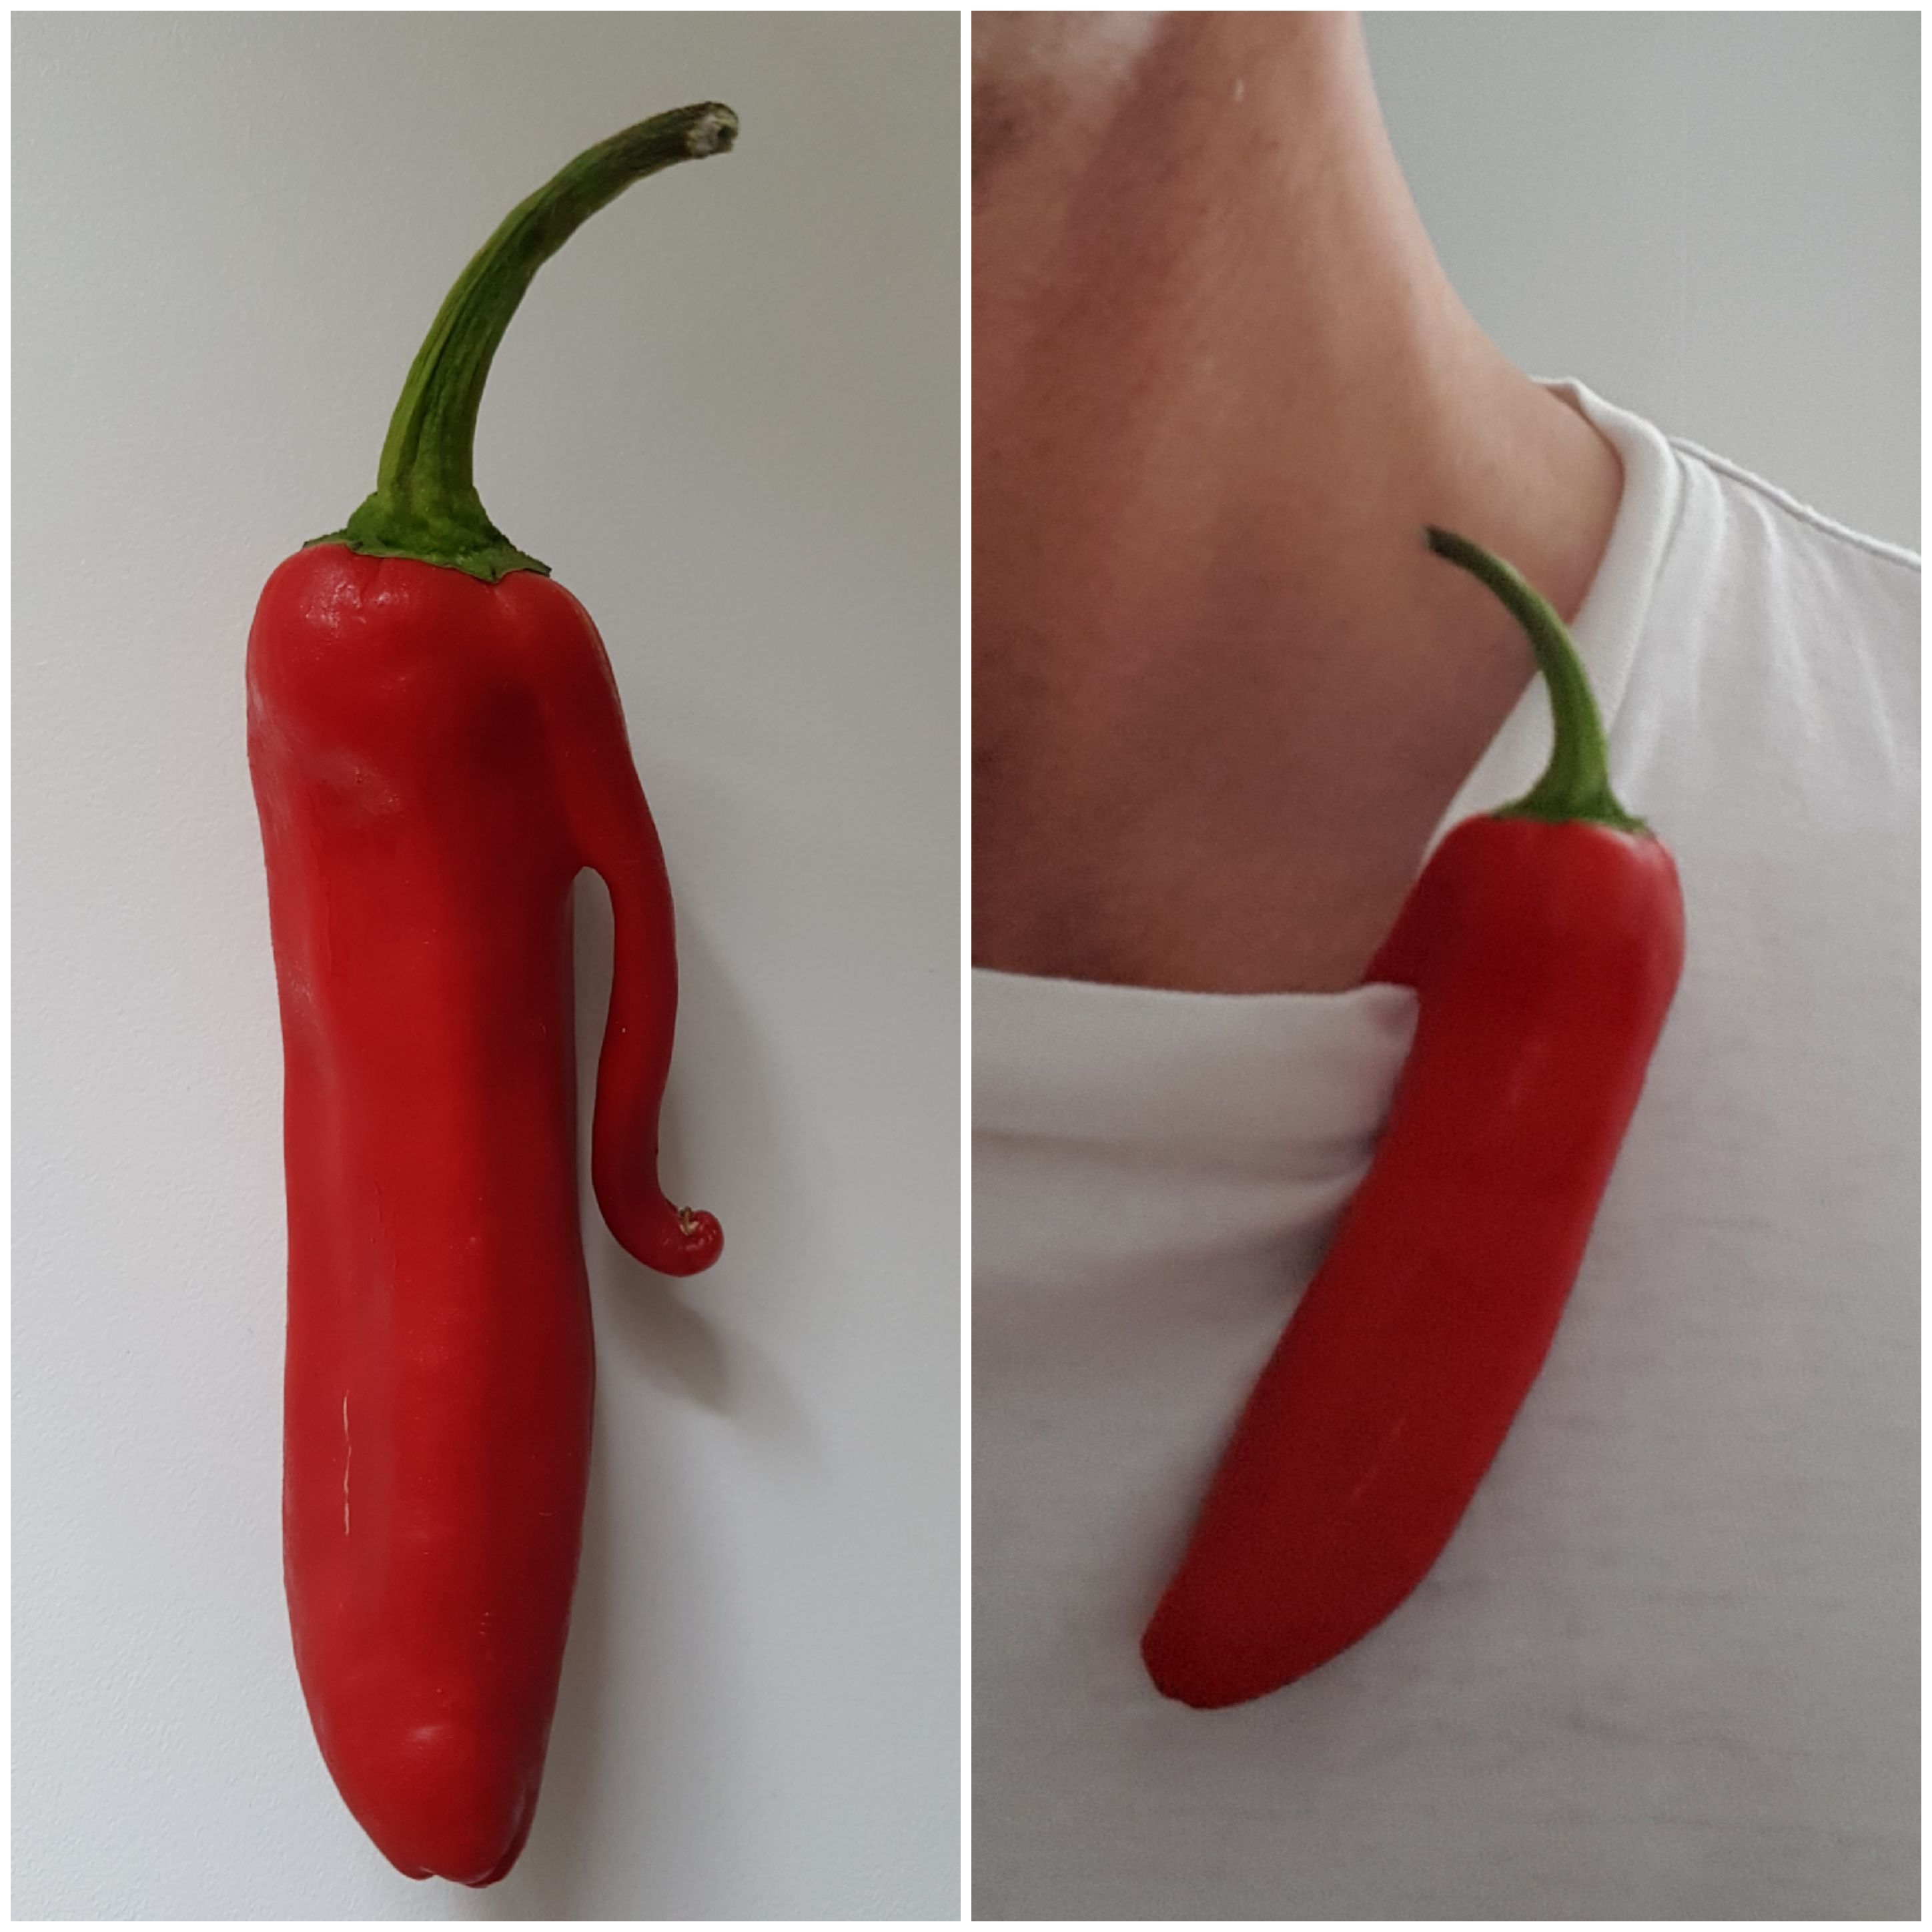 My chilli came with a handy clip so that it can be worn with elegance.